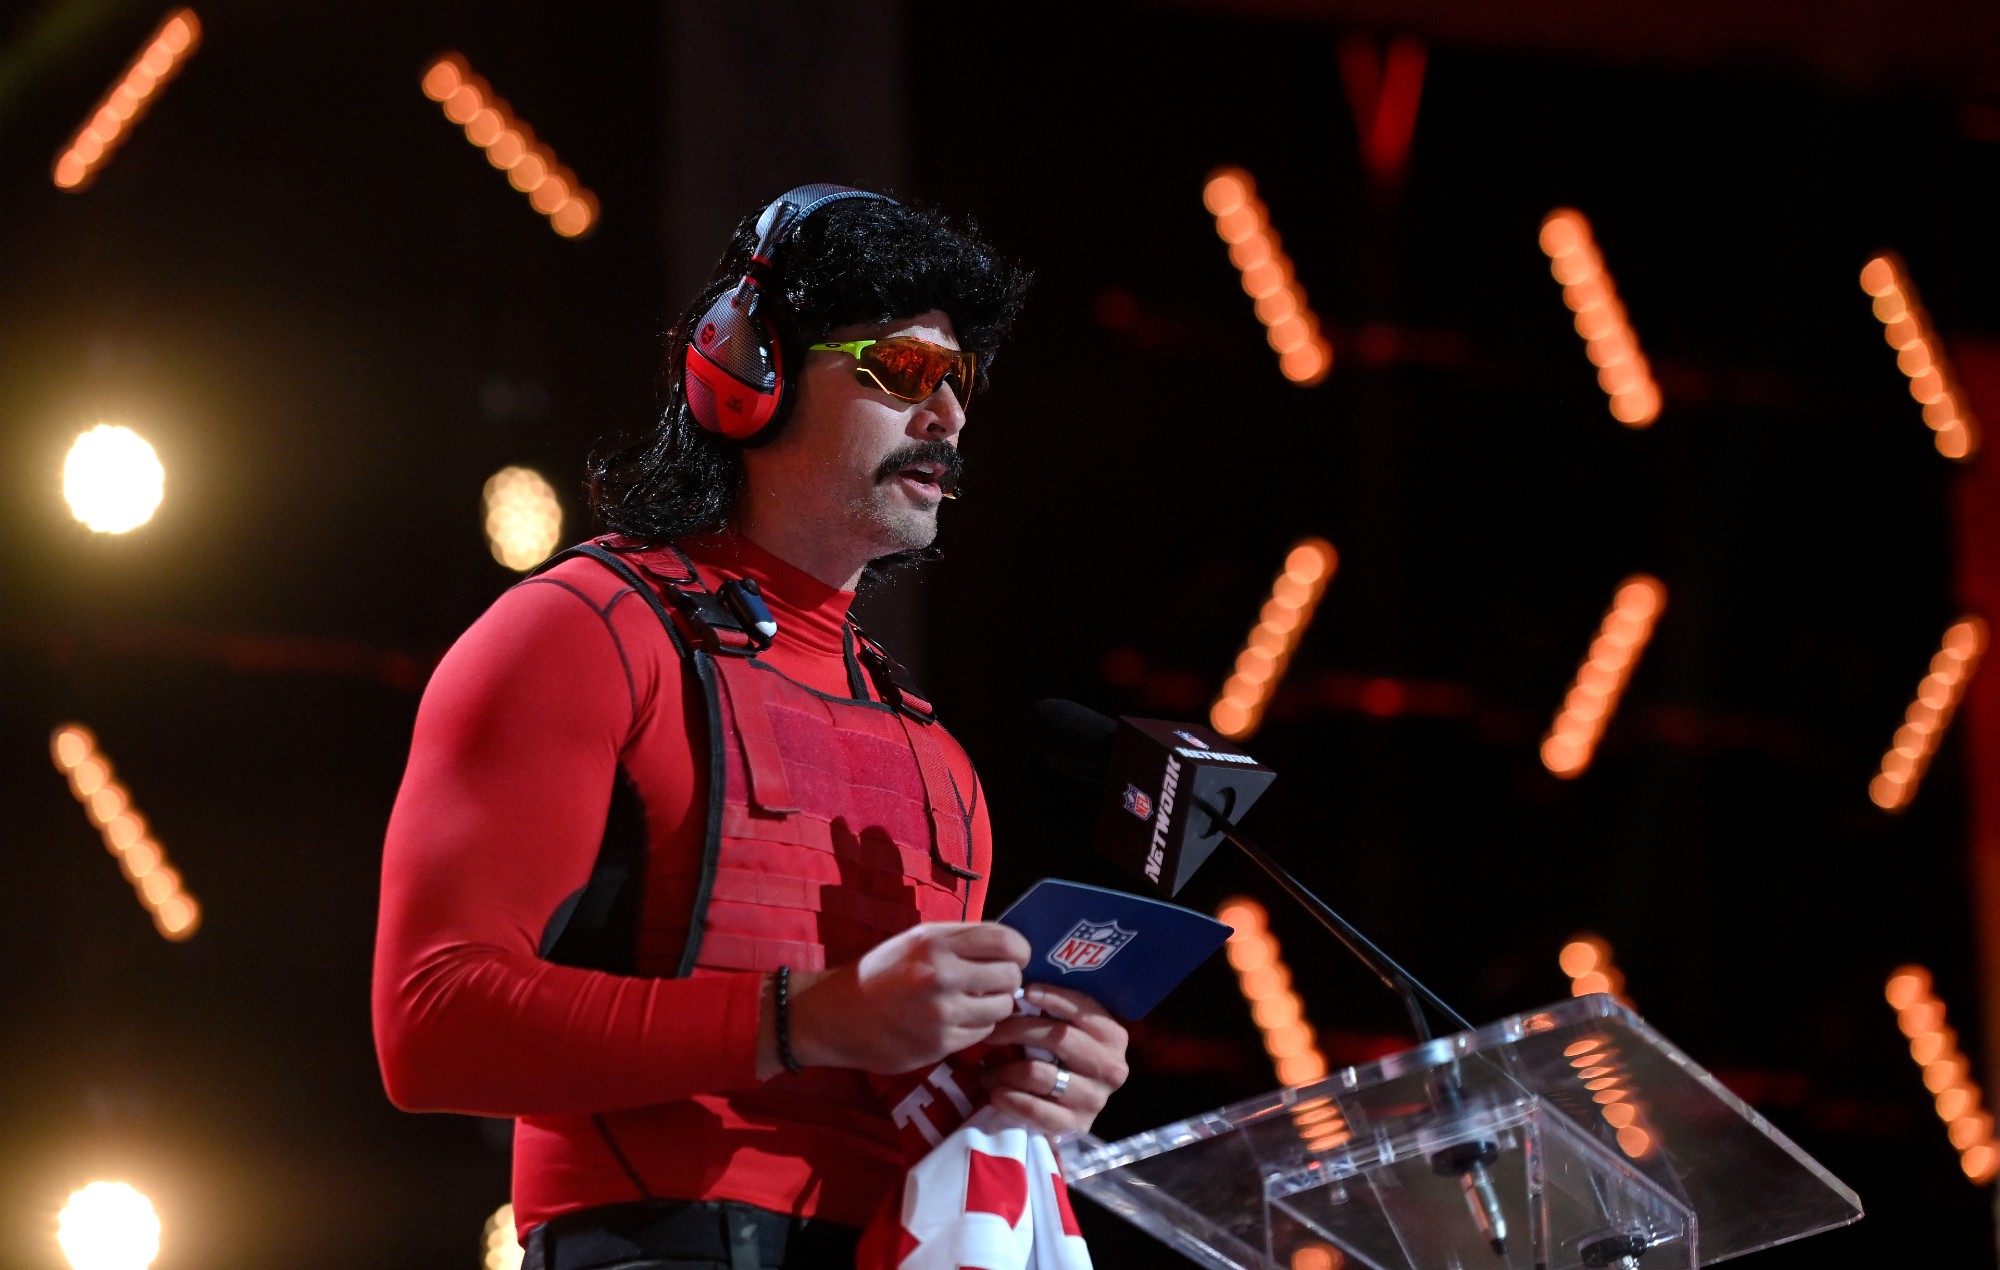 Dr Disrespect update: new report claims streamer was aware alleged victim was underage